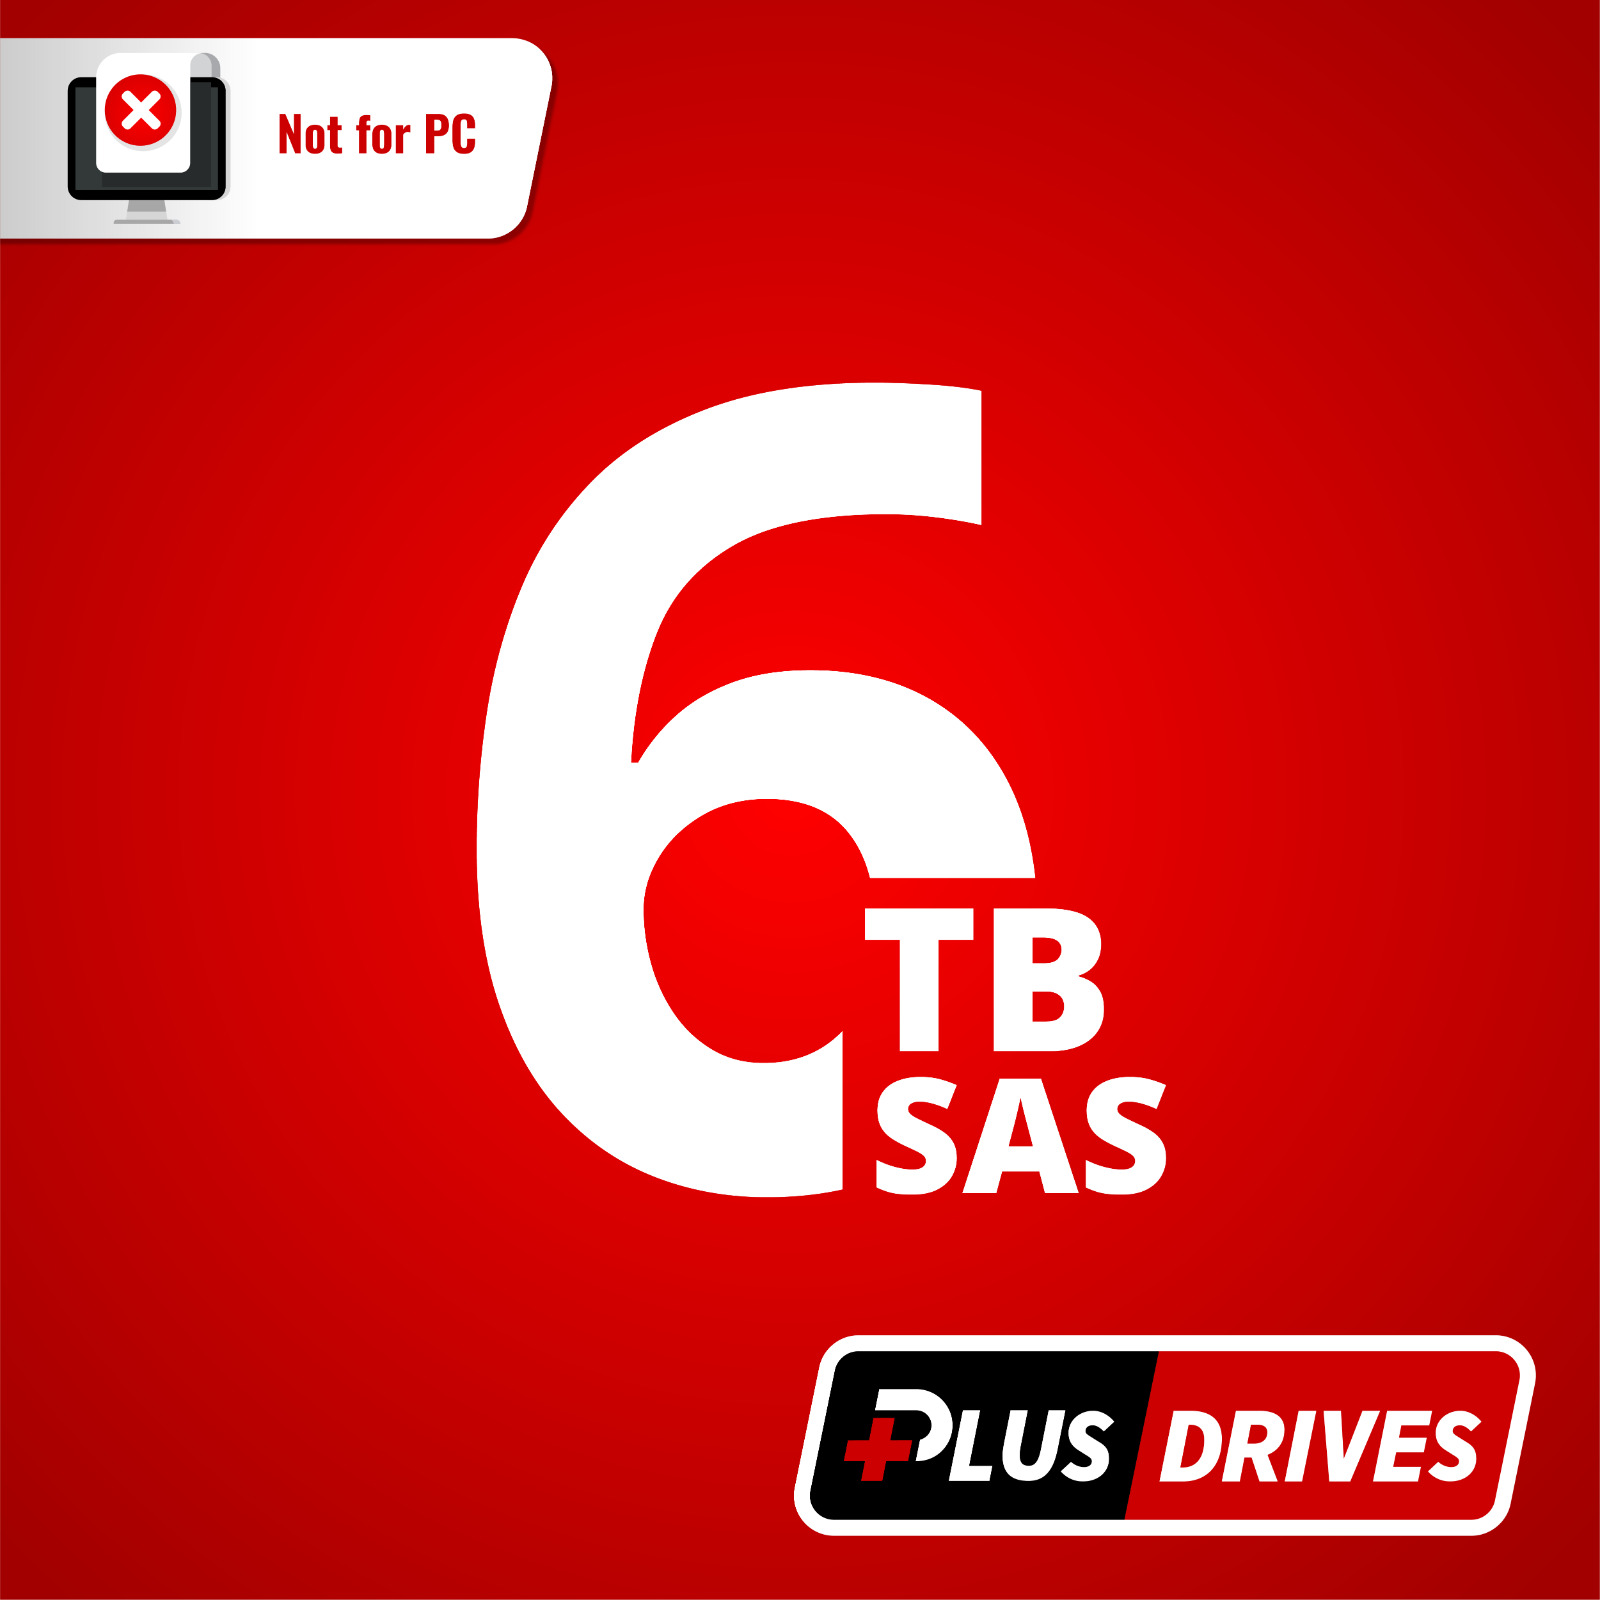 6TB SAS 3.5in Internal Enterprise Server HD for Server Use Only | Not for PC